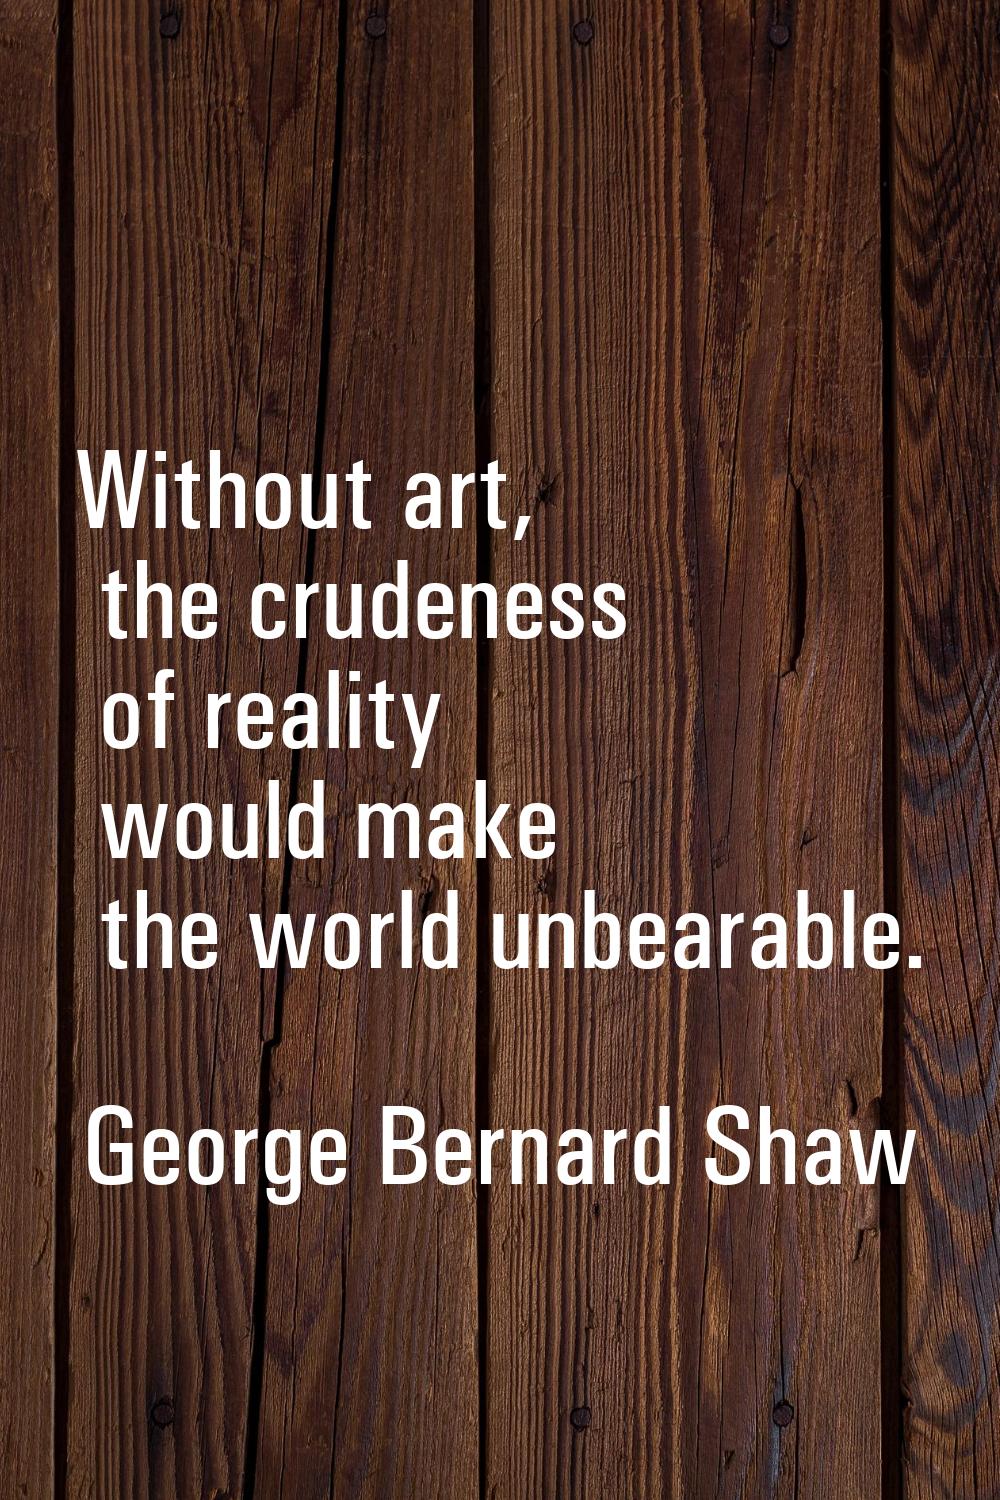 Without art, the crudeness of reality would make the world unbearable.